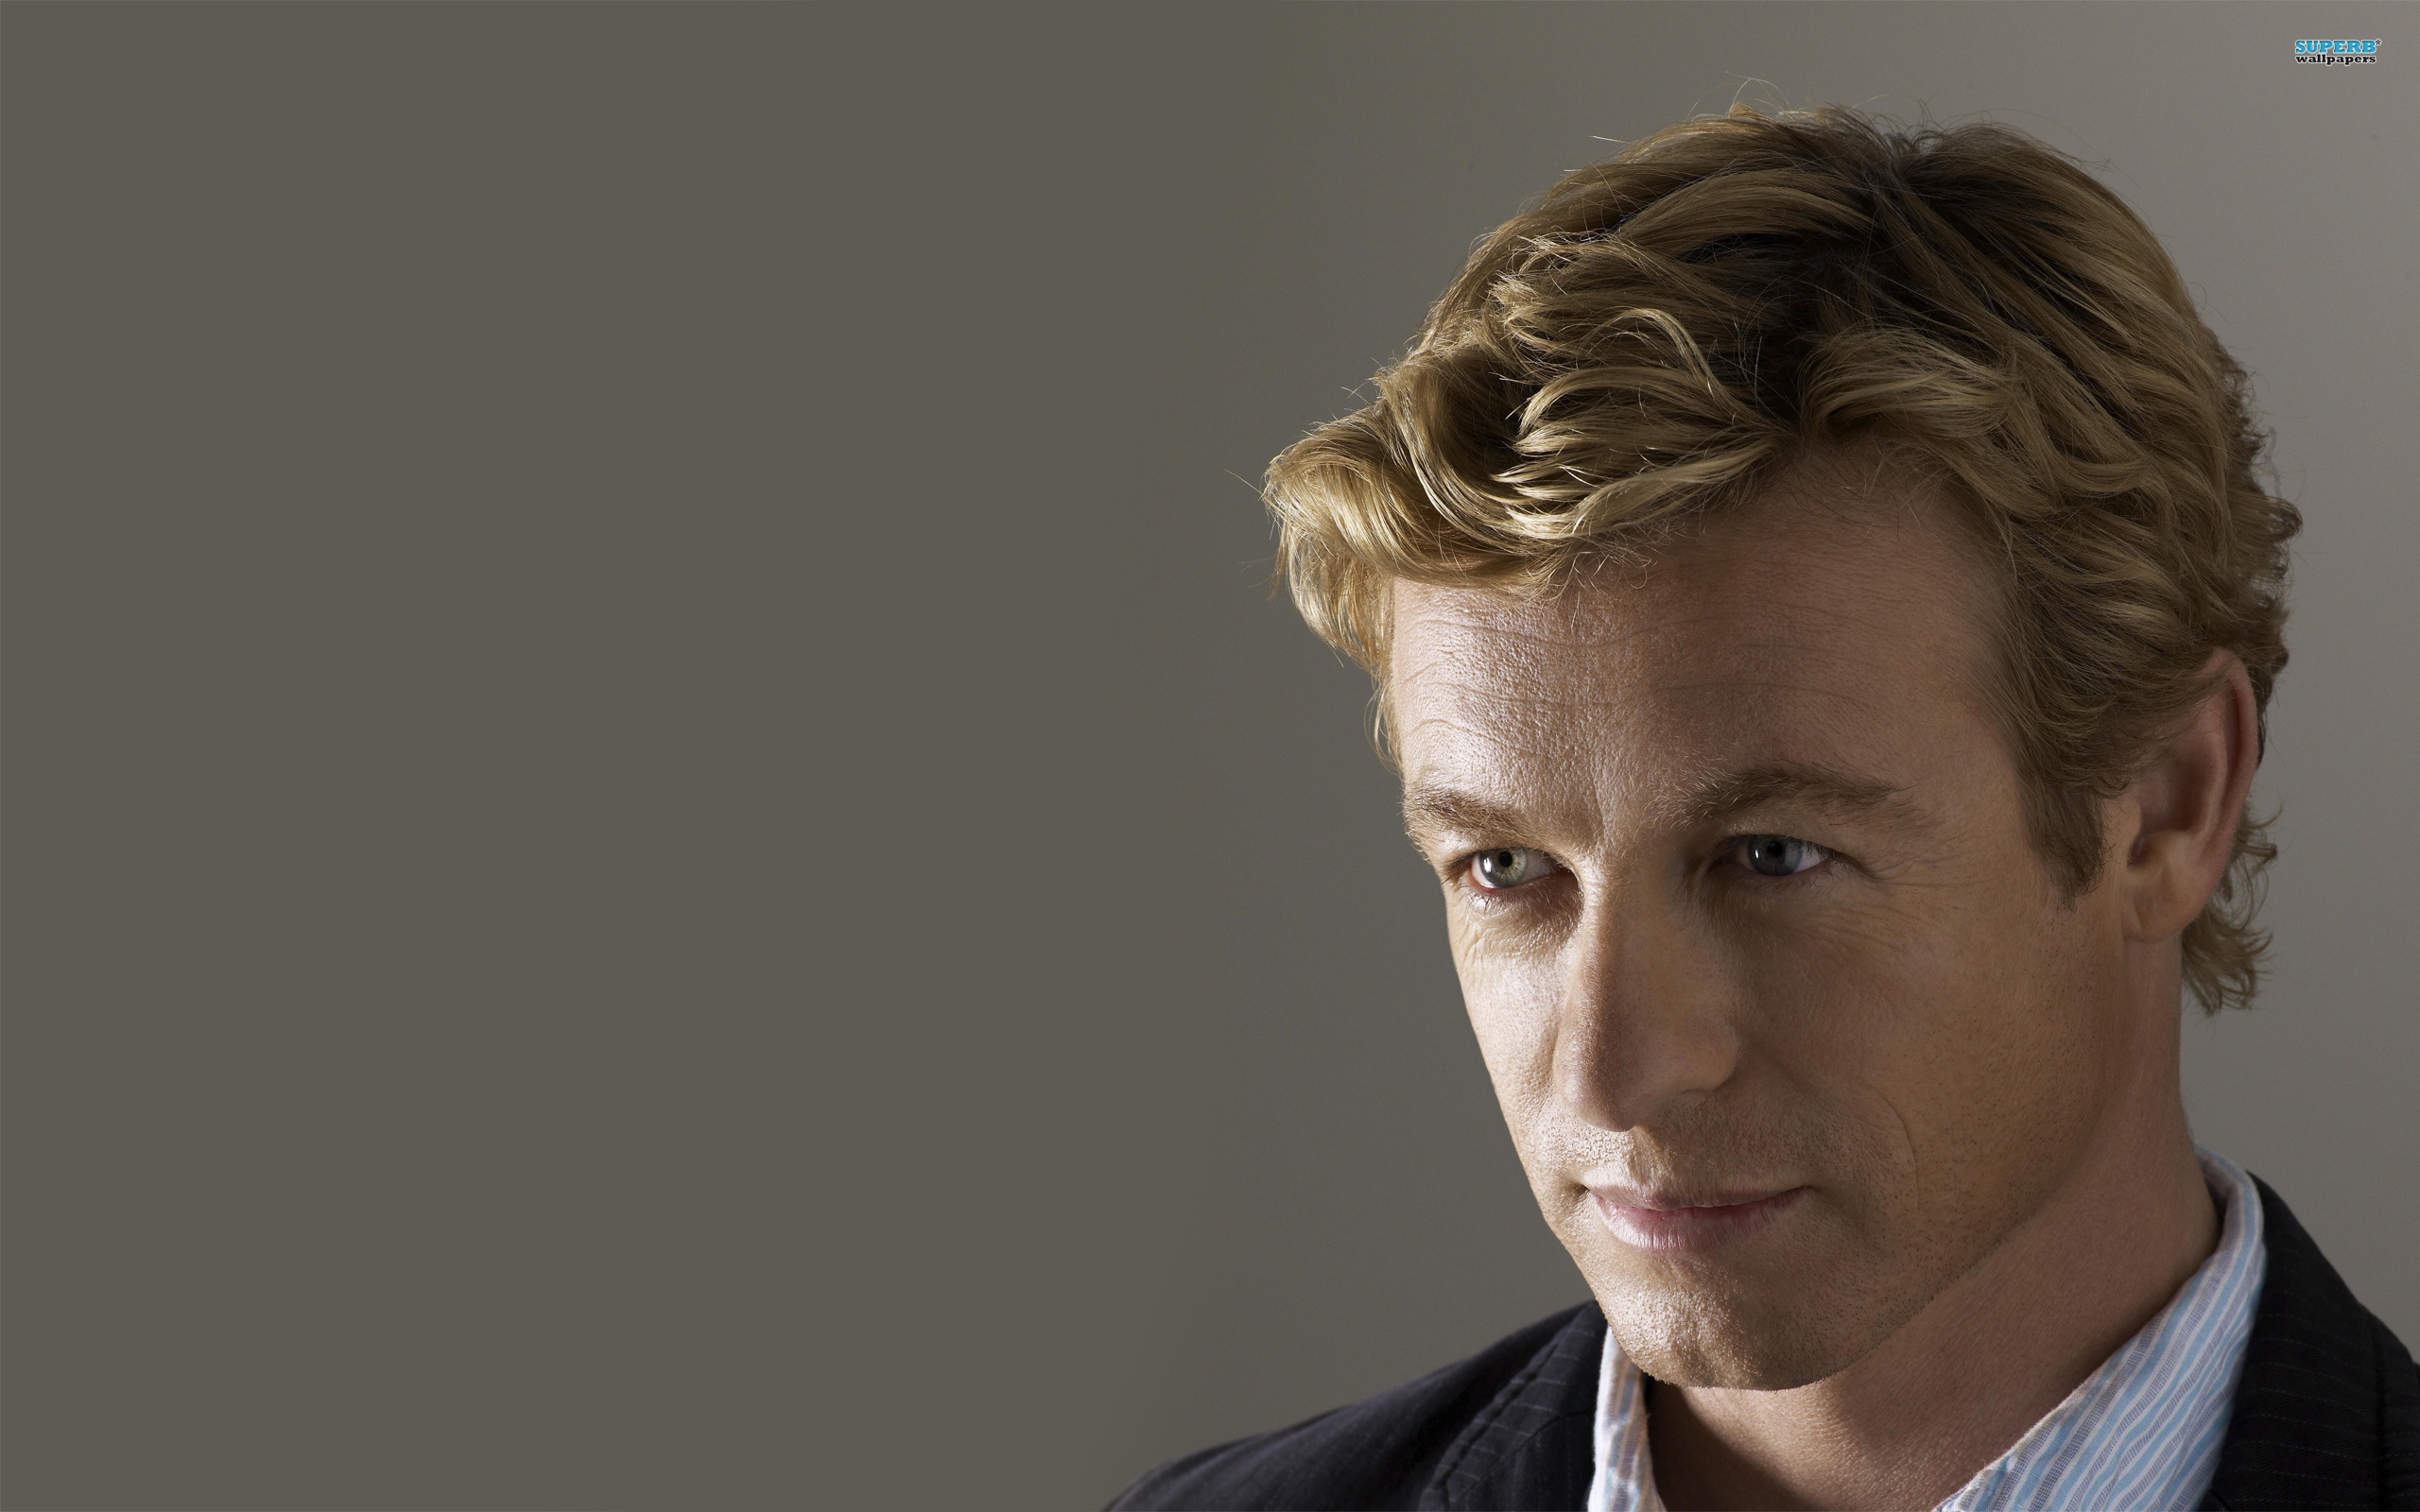 TV Show The Mentalist HD Wallpaper | Background Image